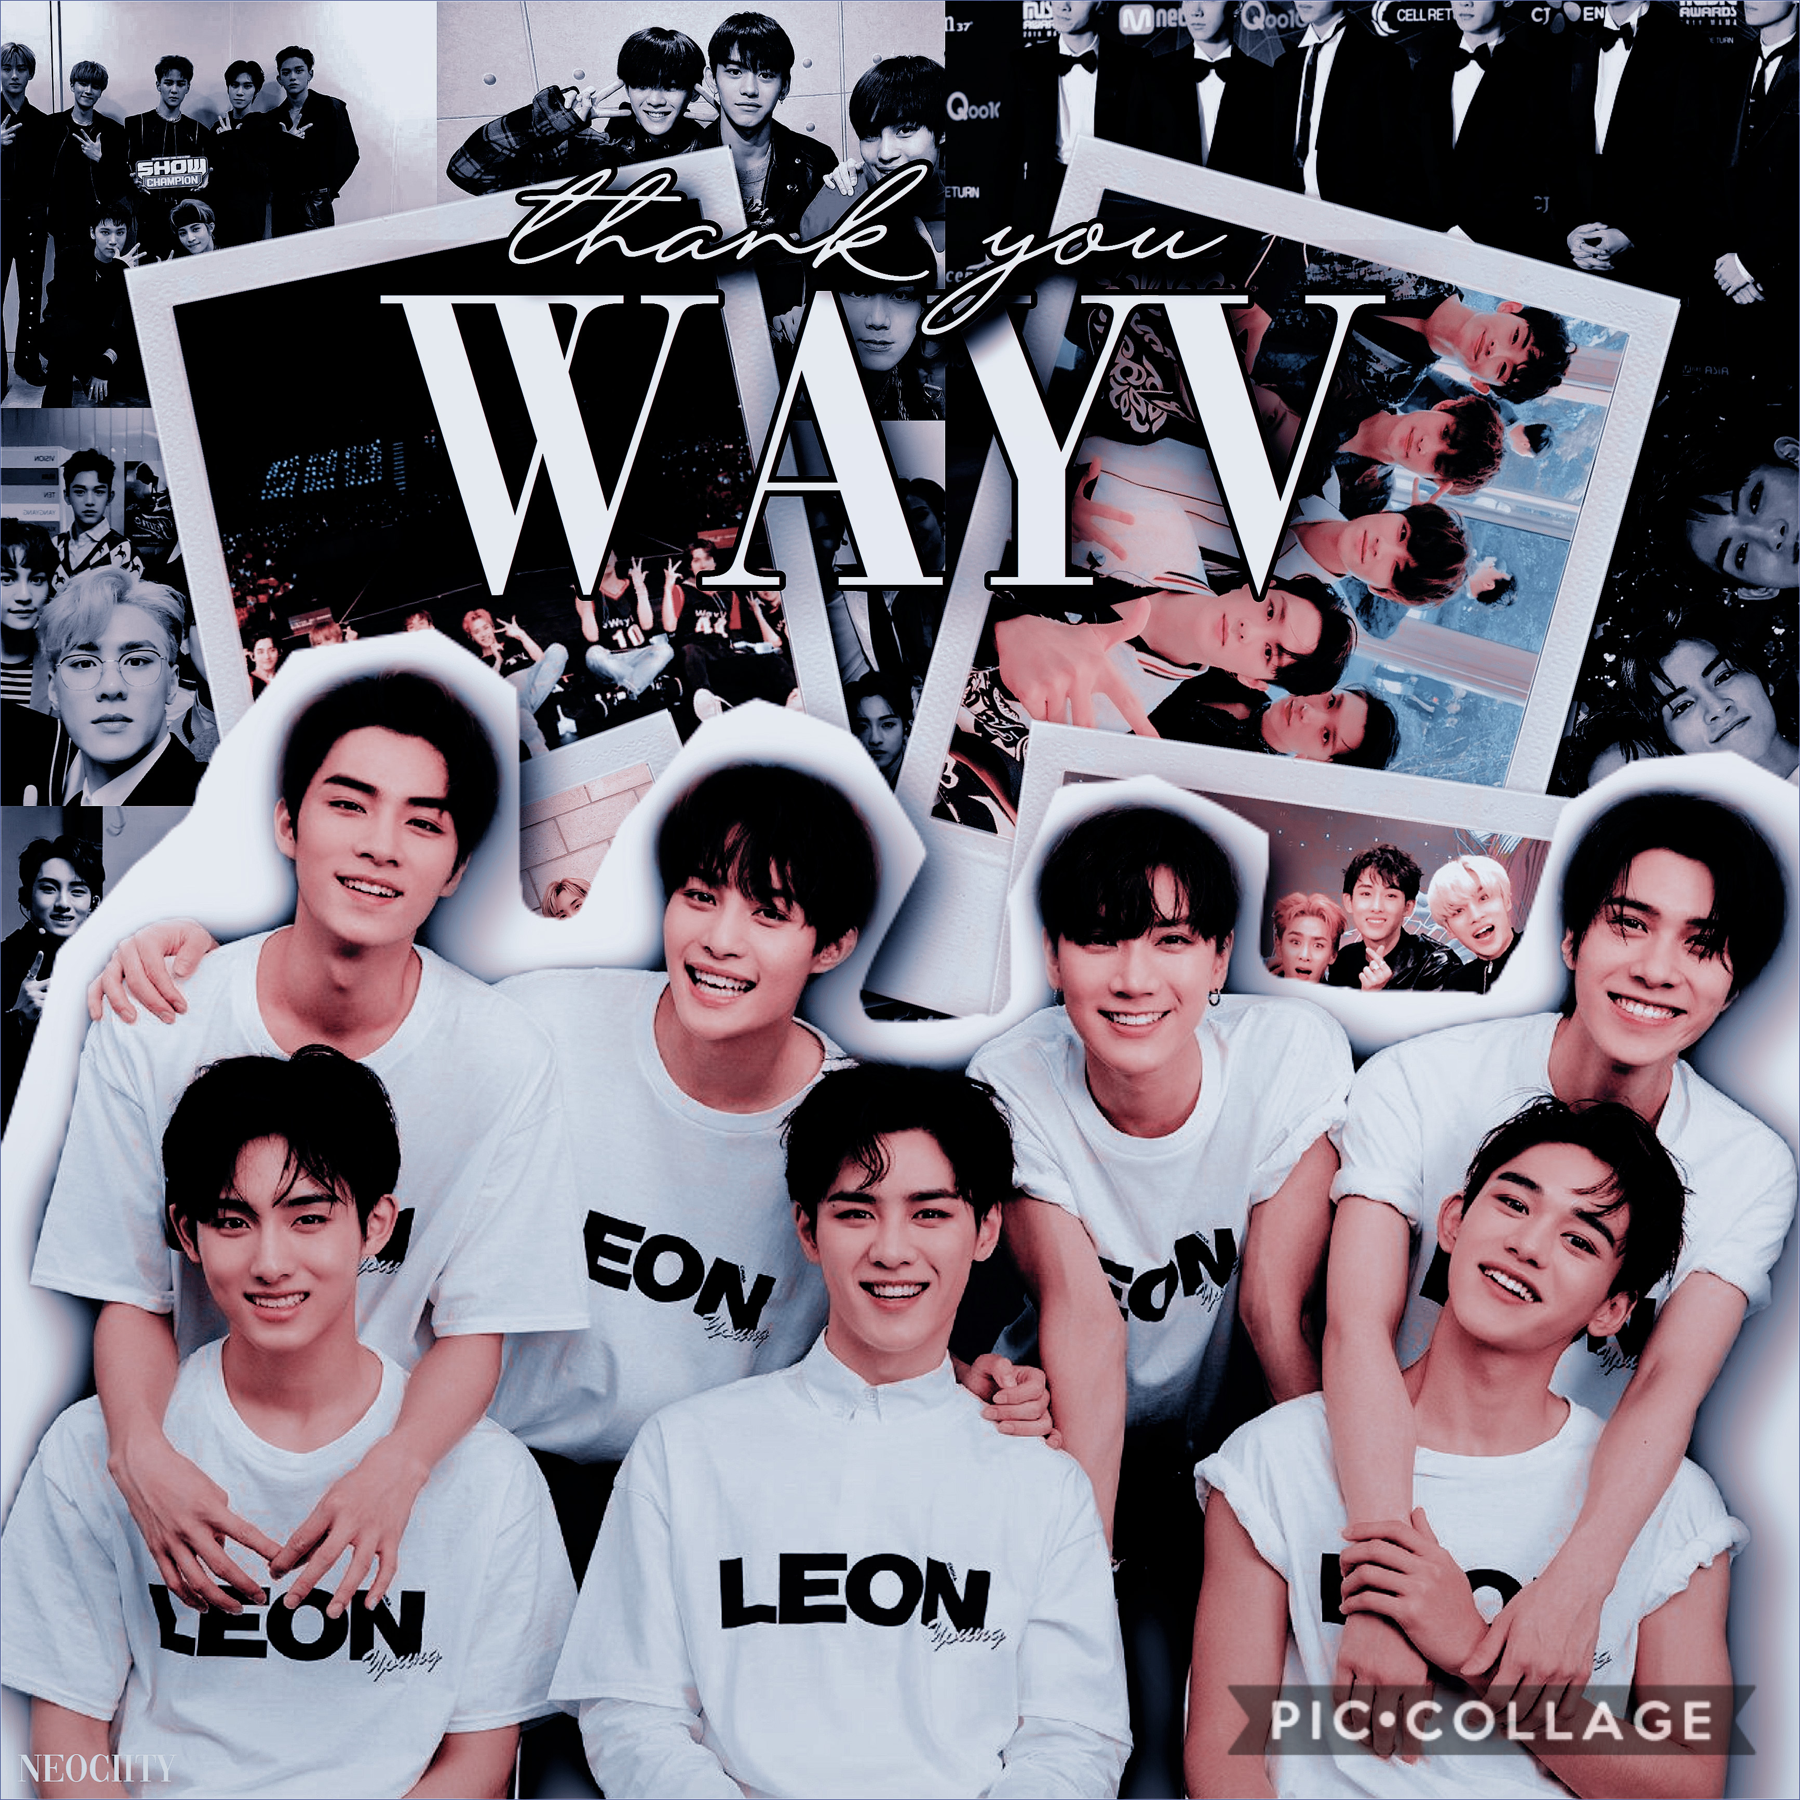 happy one year wayv!!
sorry im a little late haha 
follow me on Instagram @neociity
and subscribe to my yt too :)